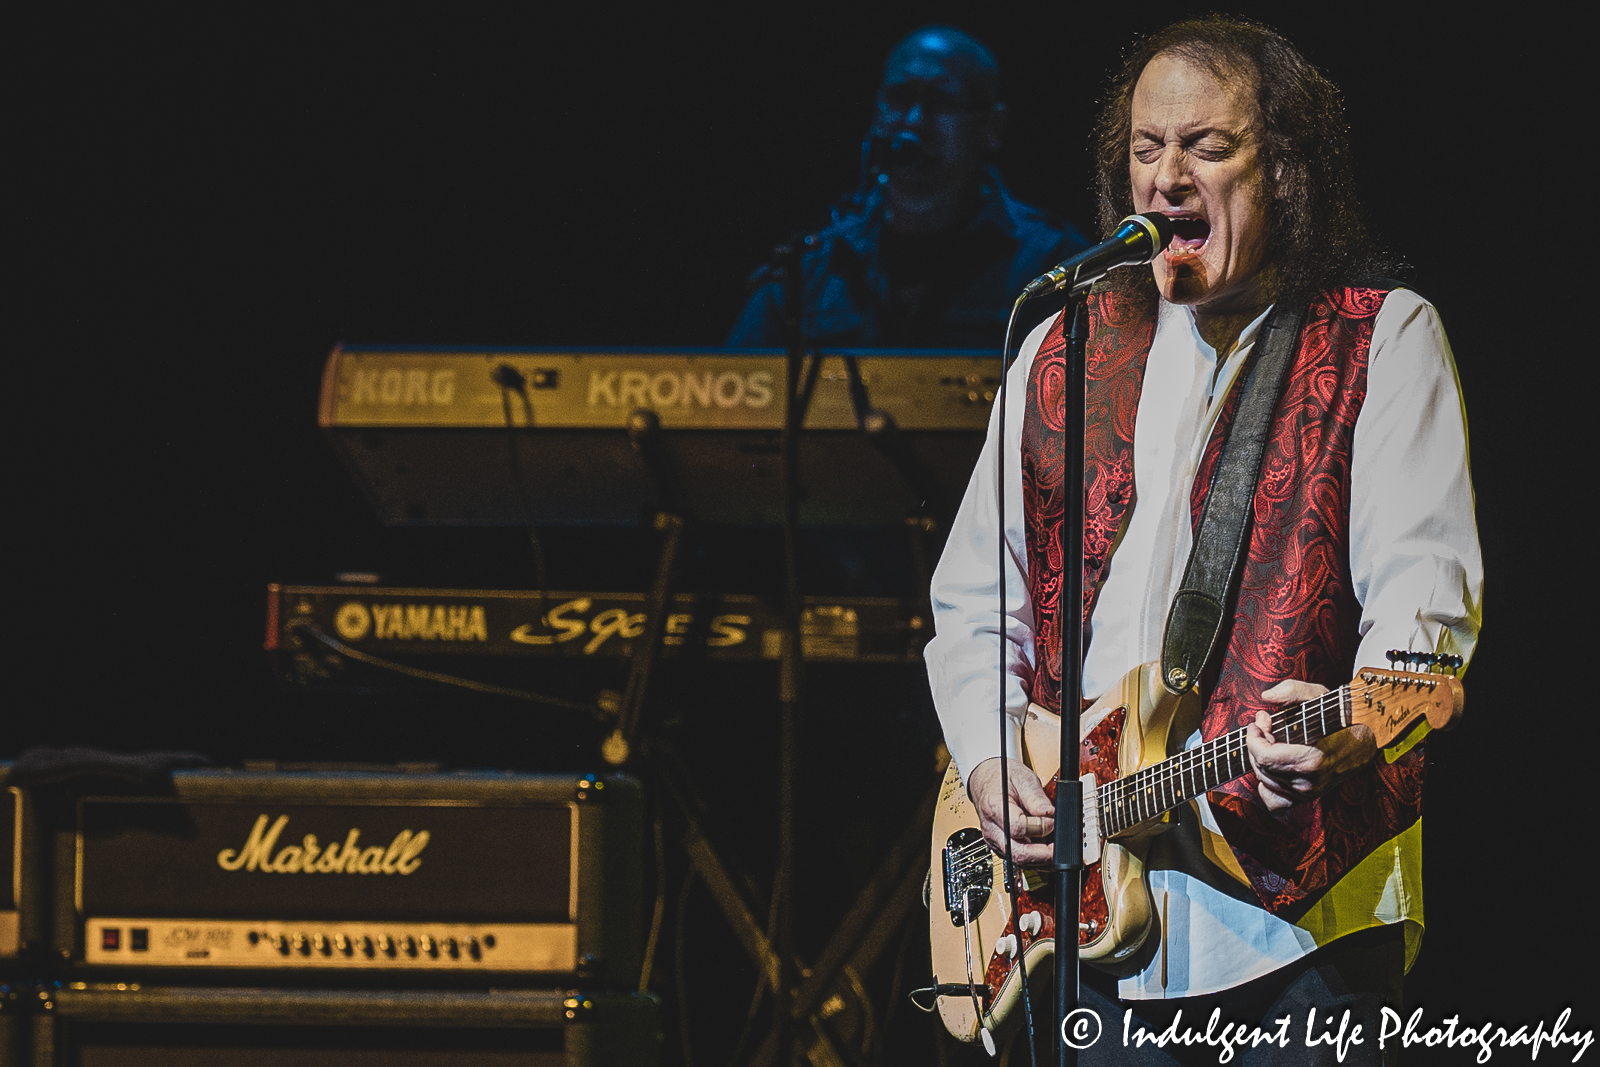 Tommy James performing "Tighter, Tighter" during a live concert performance at Kauffman Center's Muriel Kauffman Theatre in Kansas City, MO on April 1, 2023.